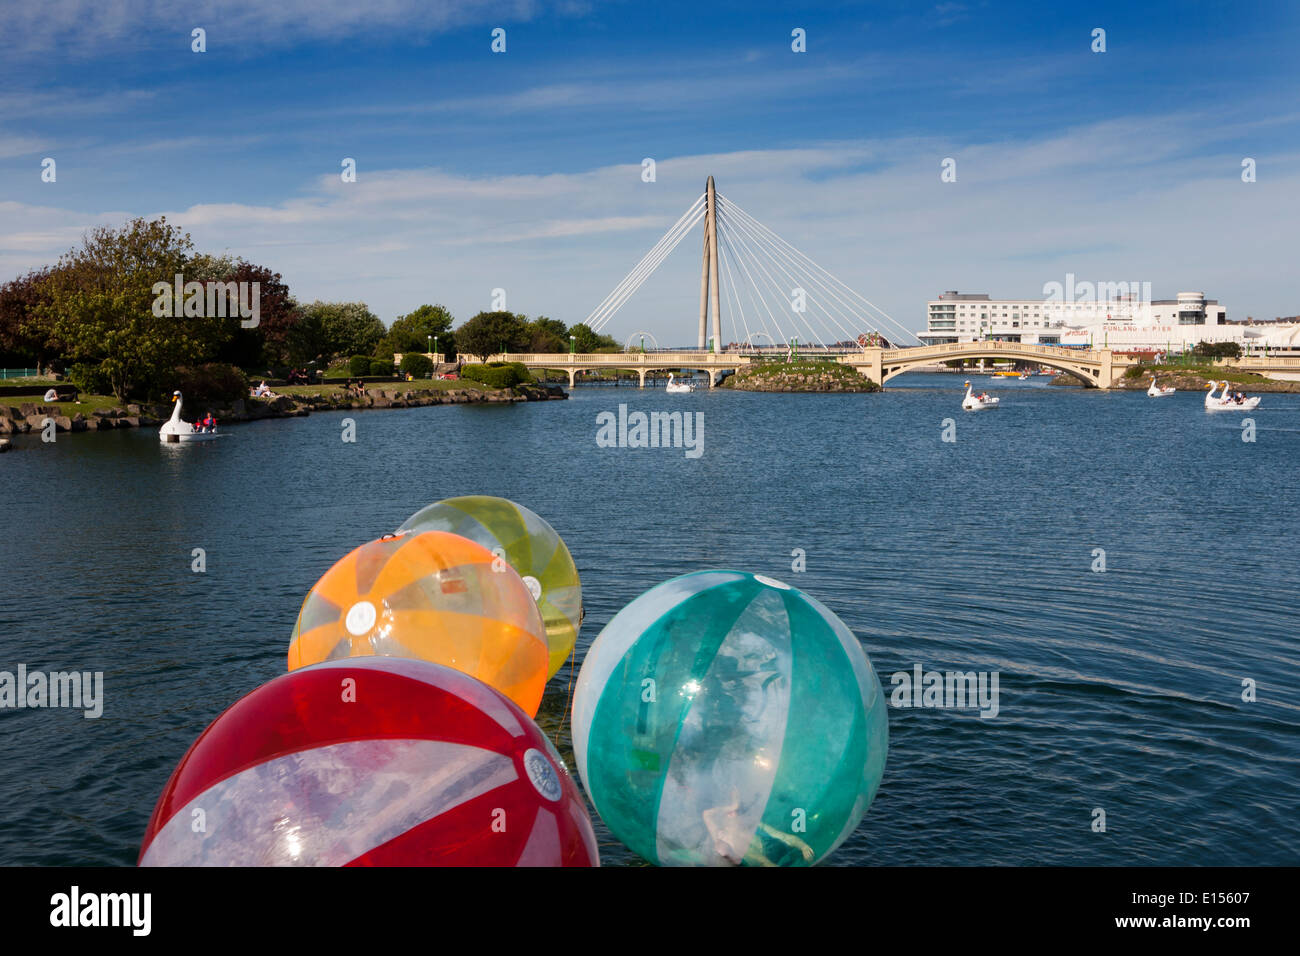 Marine lake bridge southport with children playing in bubble balls in the water, southport england merseyside Stock Photo